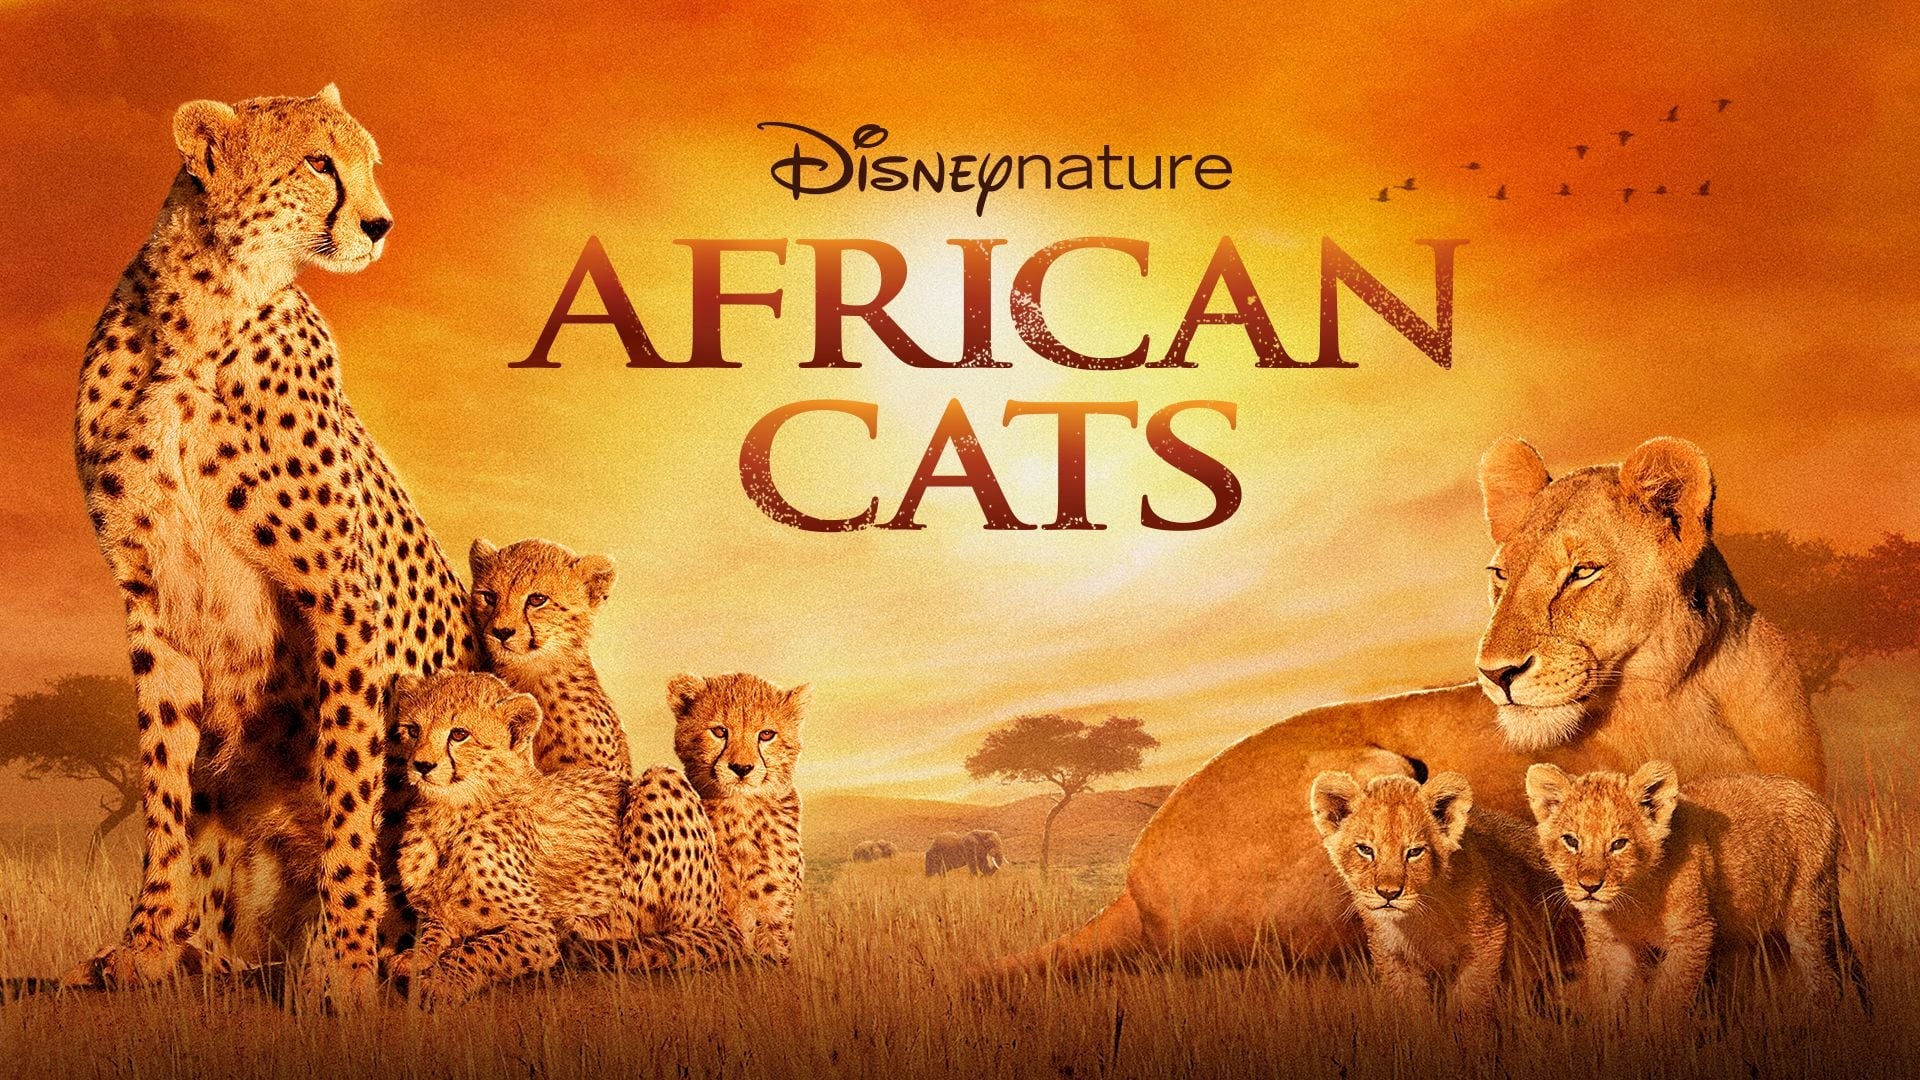 African Cats (2011)